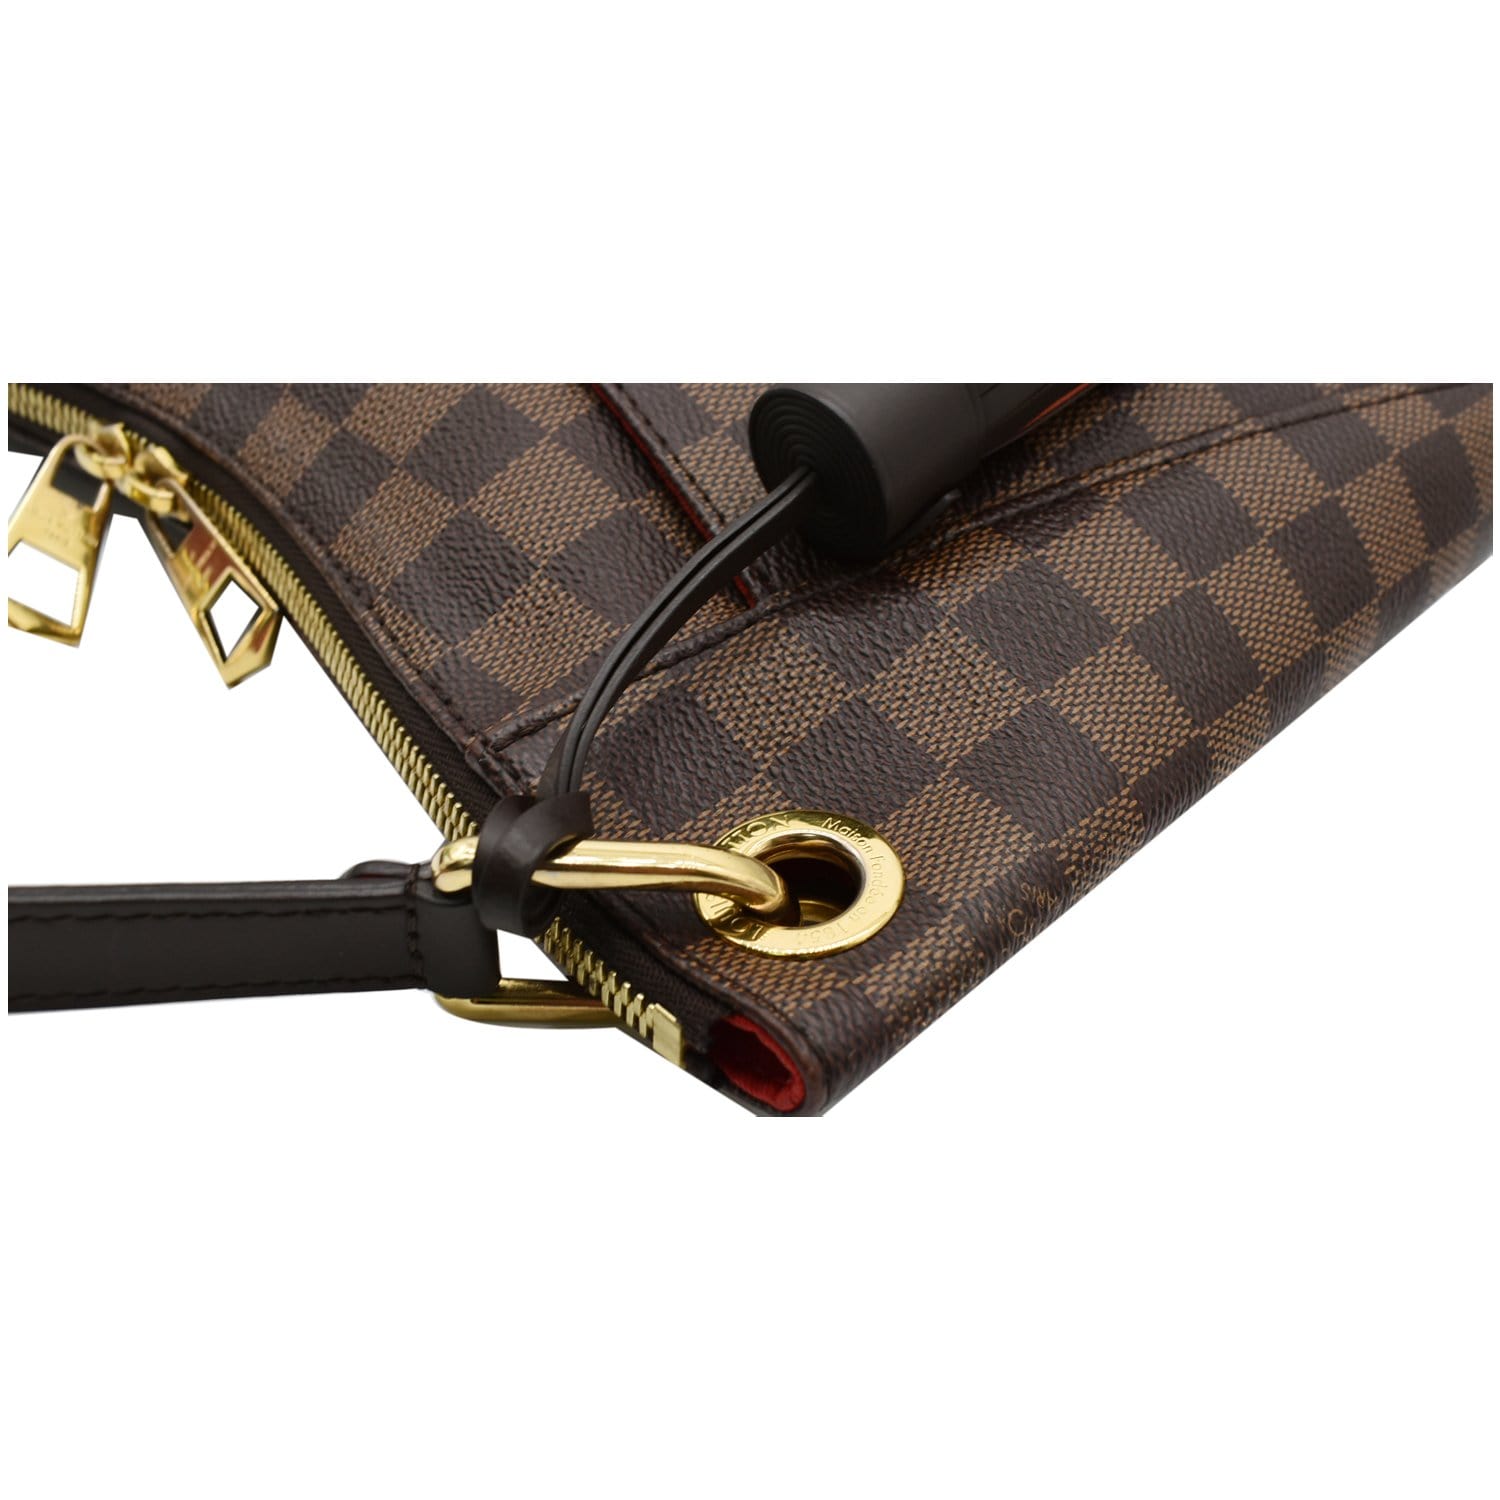 Unboxing Latest Louis Vuitton Sully handbag, Southbank Cross body & wallet!  